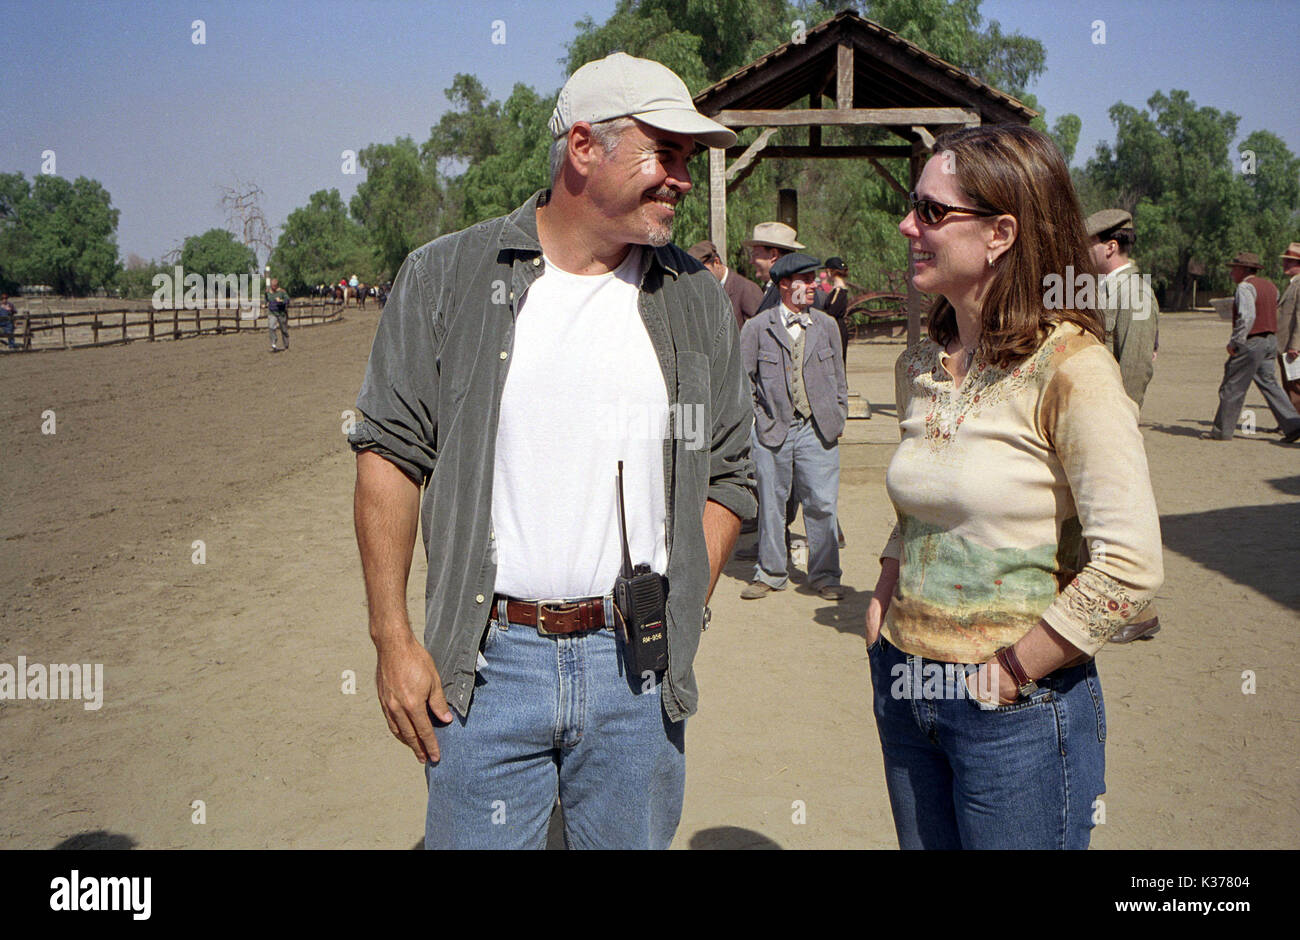 SEABISCUIT COPYRIGHT: UNIVERSAL PICTURES/DREAMWORKS LLC L-R, WRITER, DIRECTOR AND PRODUCER, GARY ROSS AND PRODUCER, KATHLEEN KENNEDY   SEABISCUIT COPYRIGHT: UNIVERSAL PICTURES/DREAMWORKS LLC L-R, WRITER, DIRECTOR AND PRODUCER, GARY ROSS AND PRODUCER, KATHLEEN KENNEDY     Date: 2003 Stock Photo